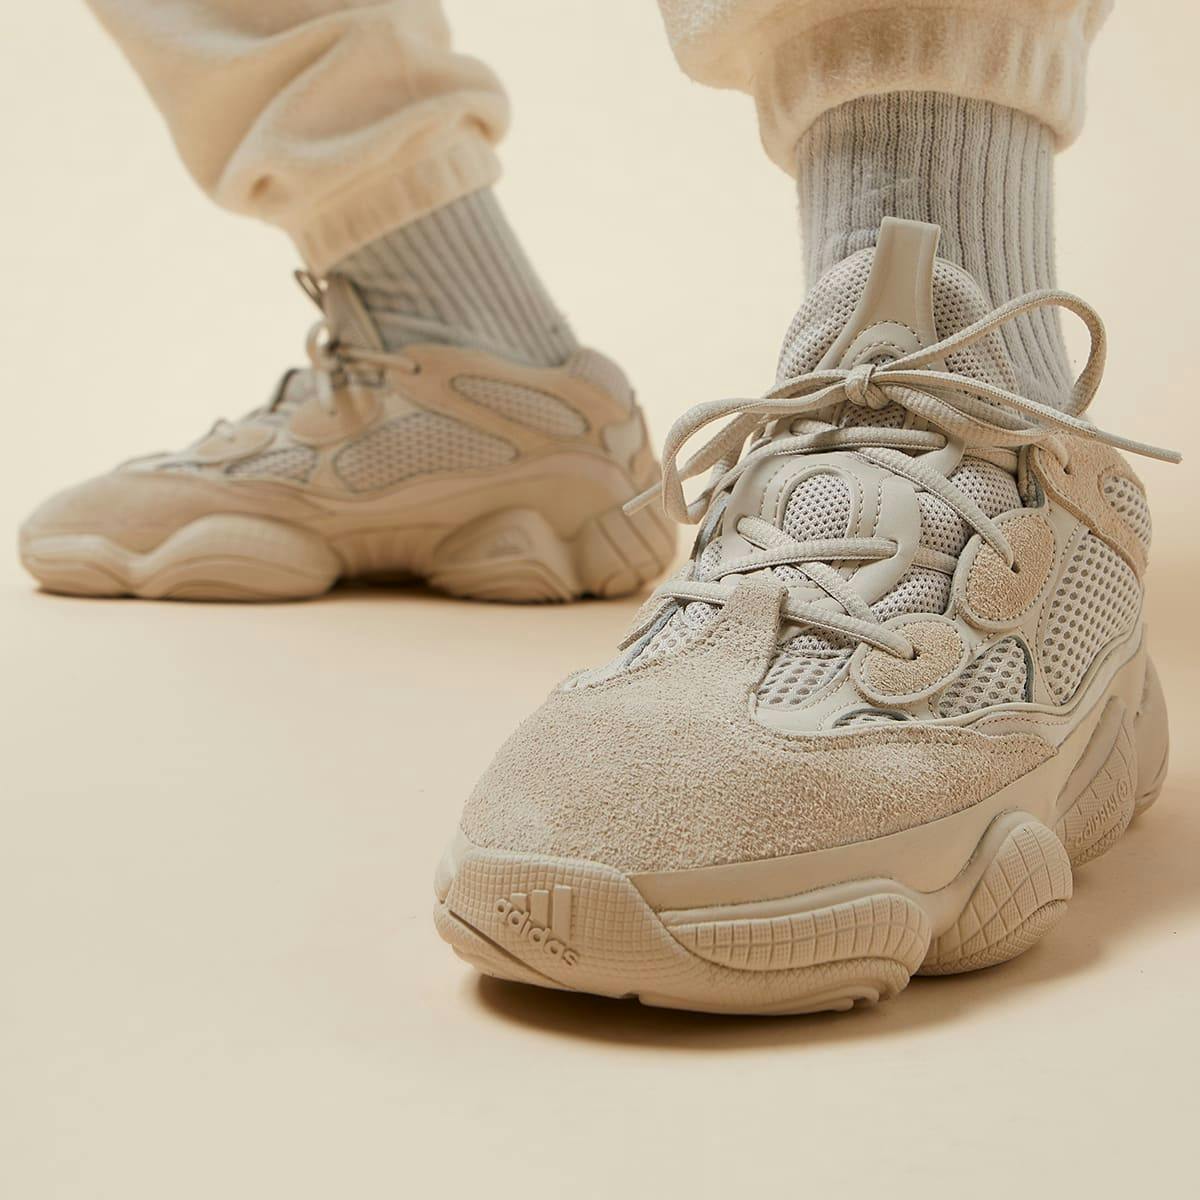 Take A Closer Look At The Adidas Kanye West Yeezy 500 Blush End Global